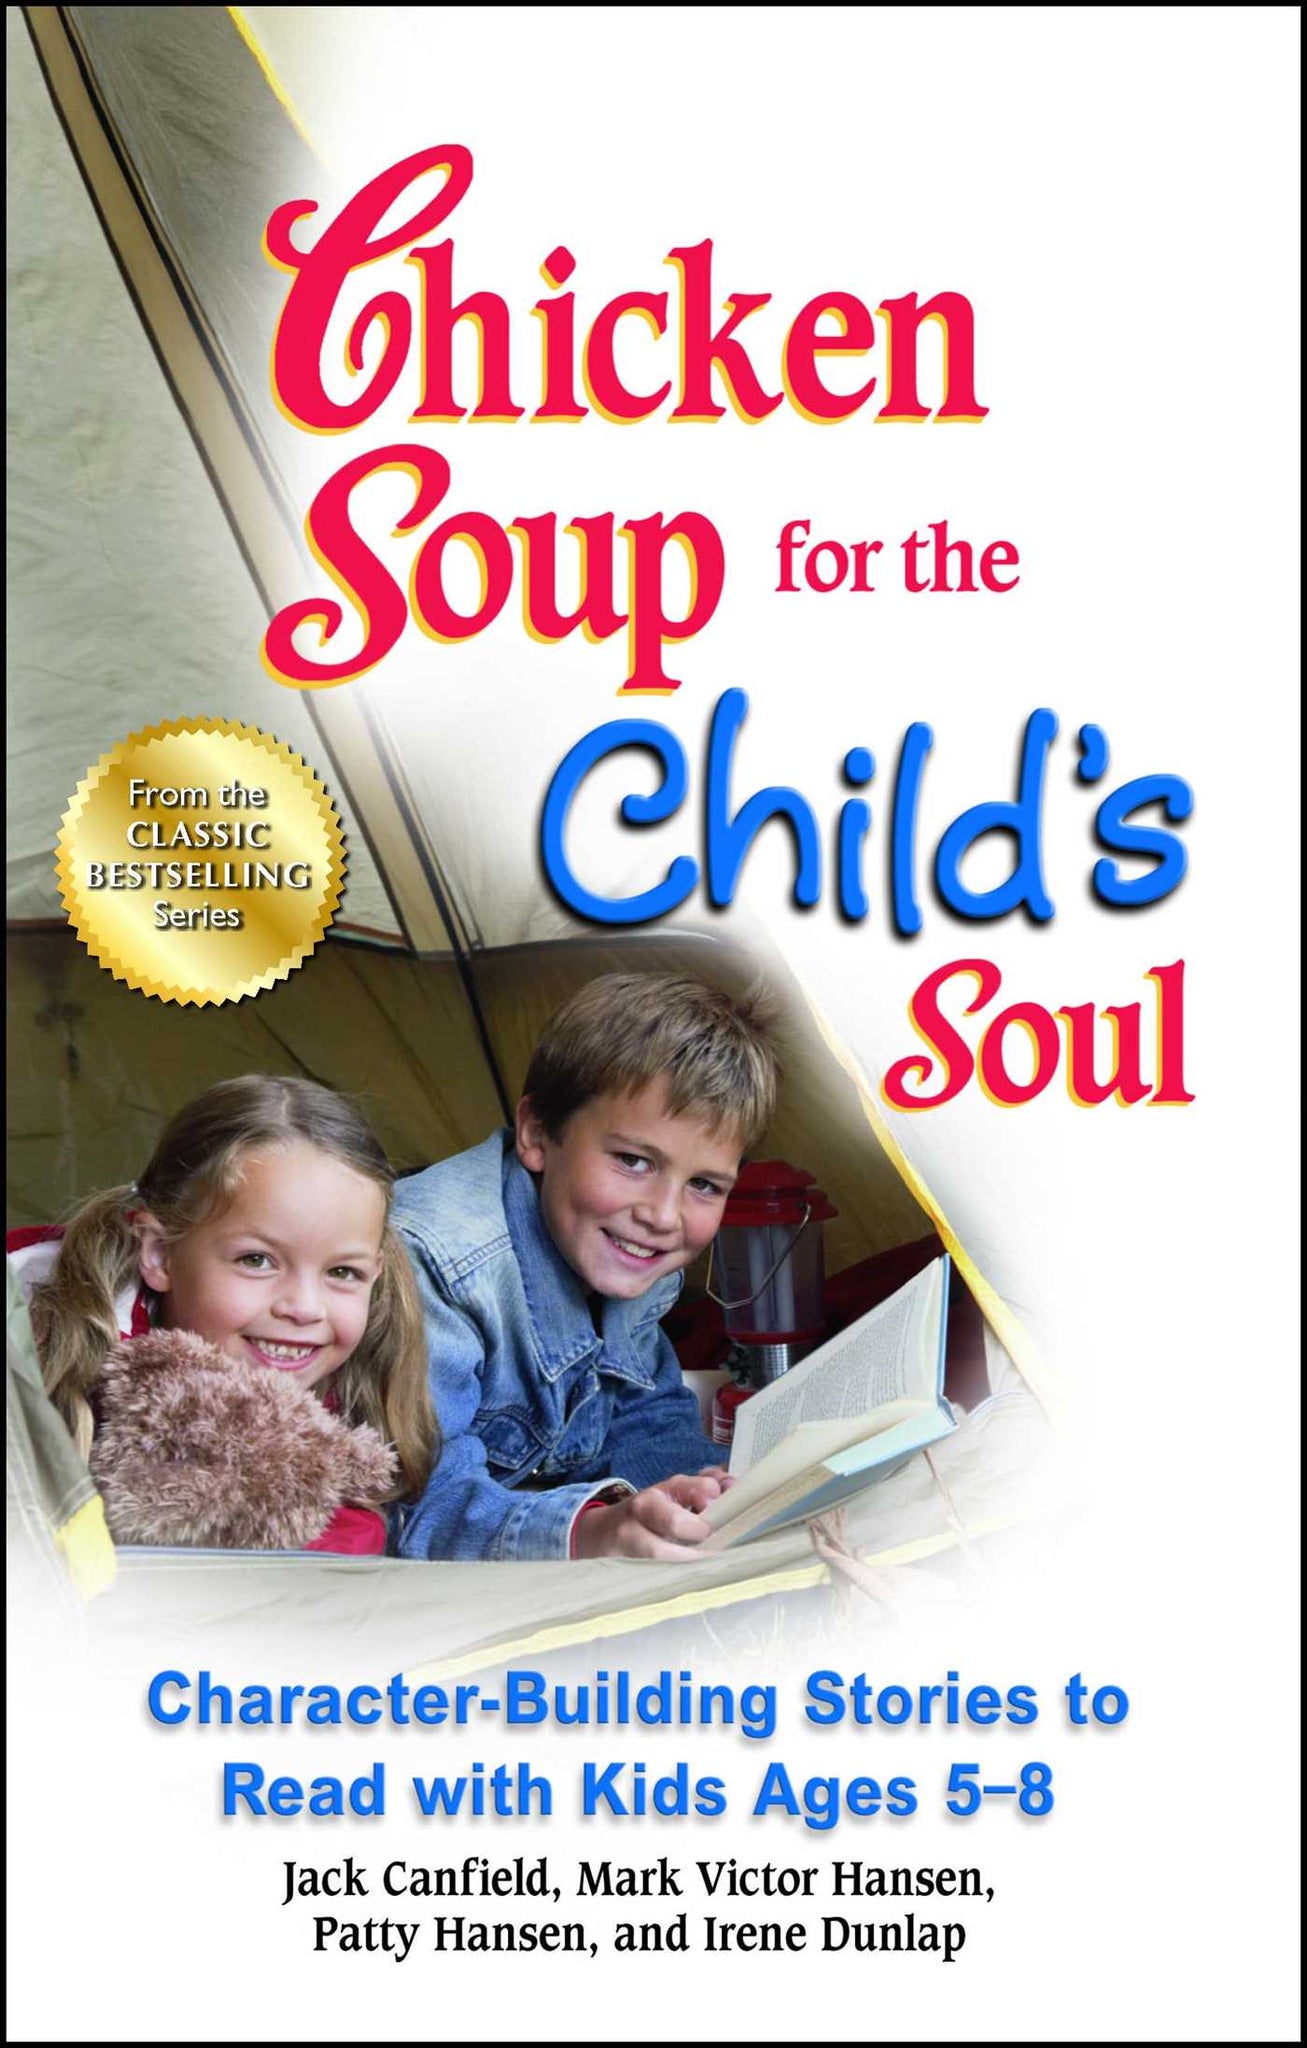 Chicken Soup for the Child's Soul : Character-Building Stories to Read with Kids Ages 5-8